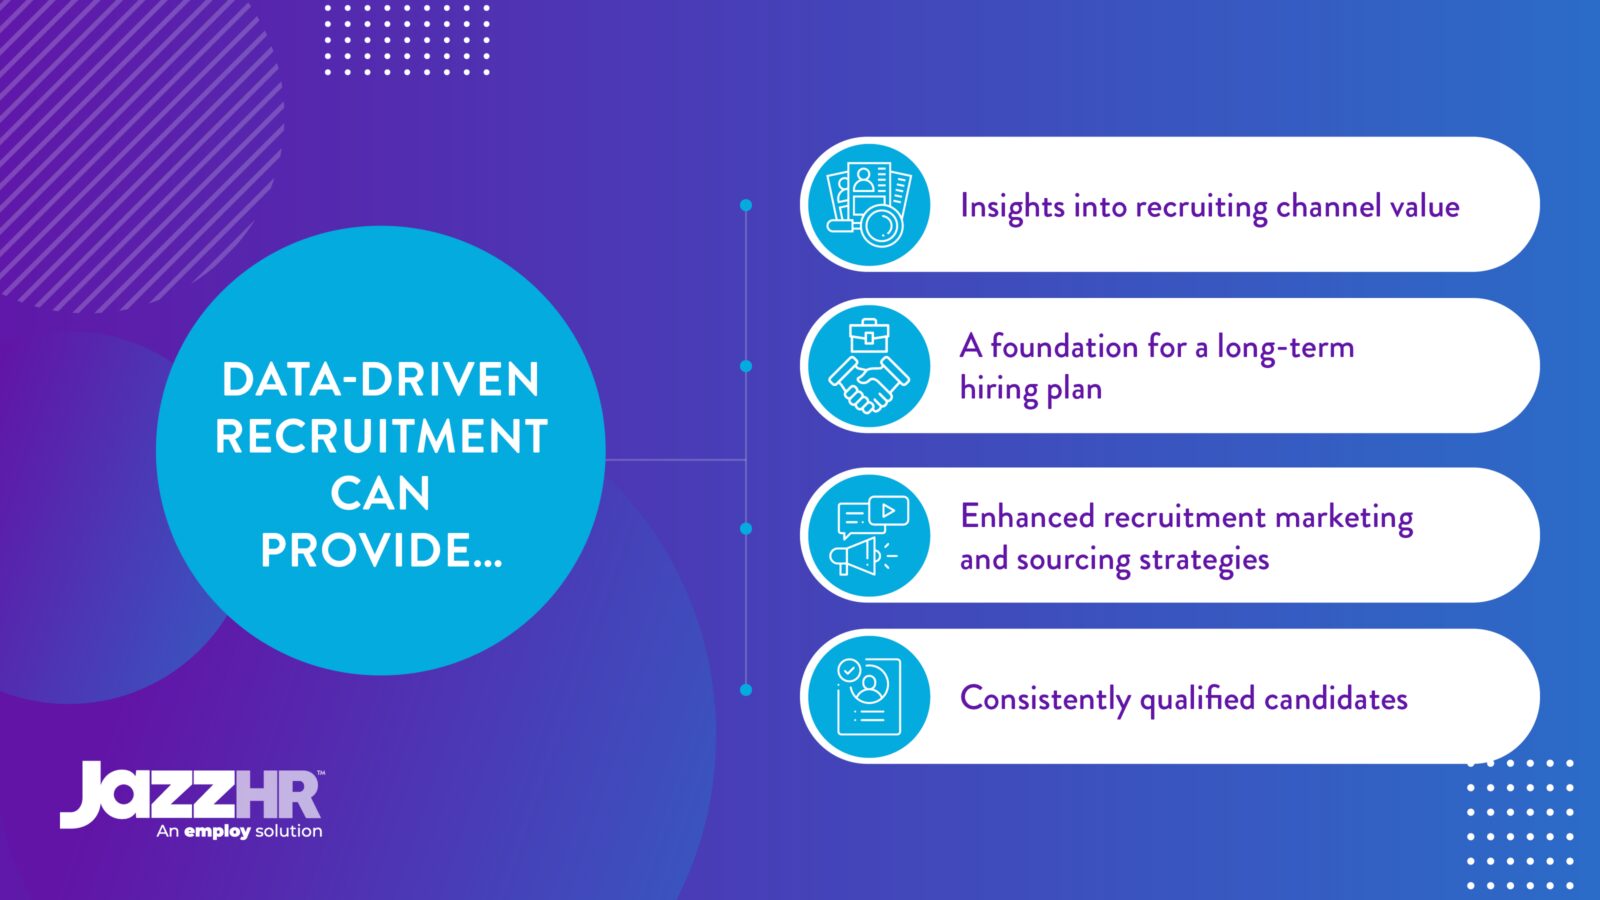 Data-driven recruiting can provide insights into areas like recruiting channel value, long-term hiring, and qualified candidates, as discussed below. 